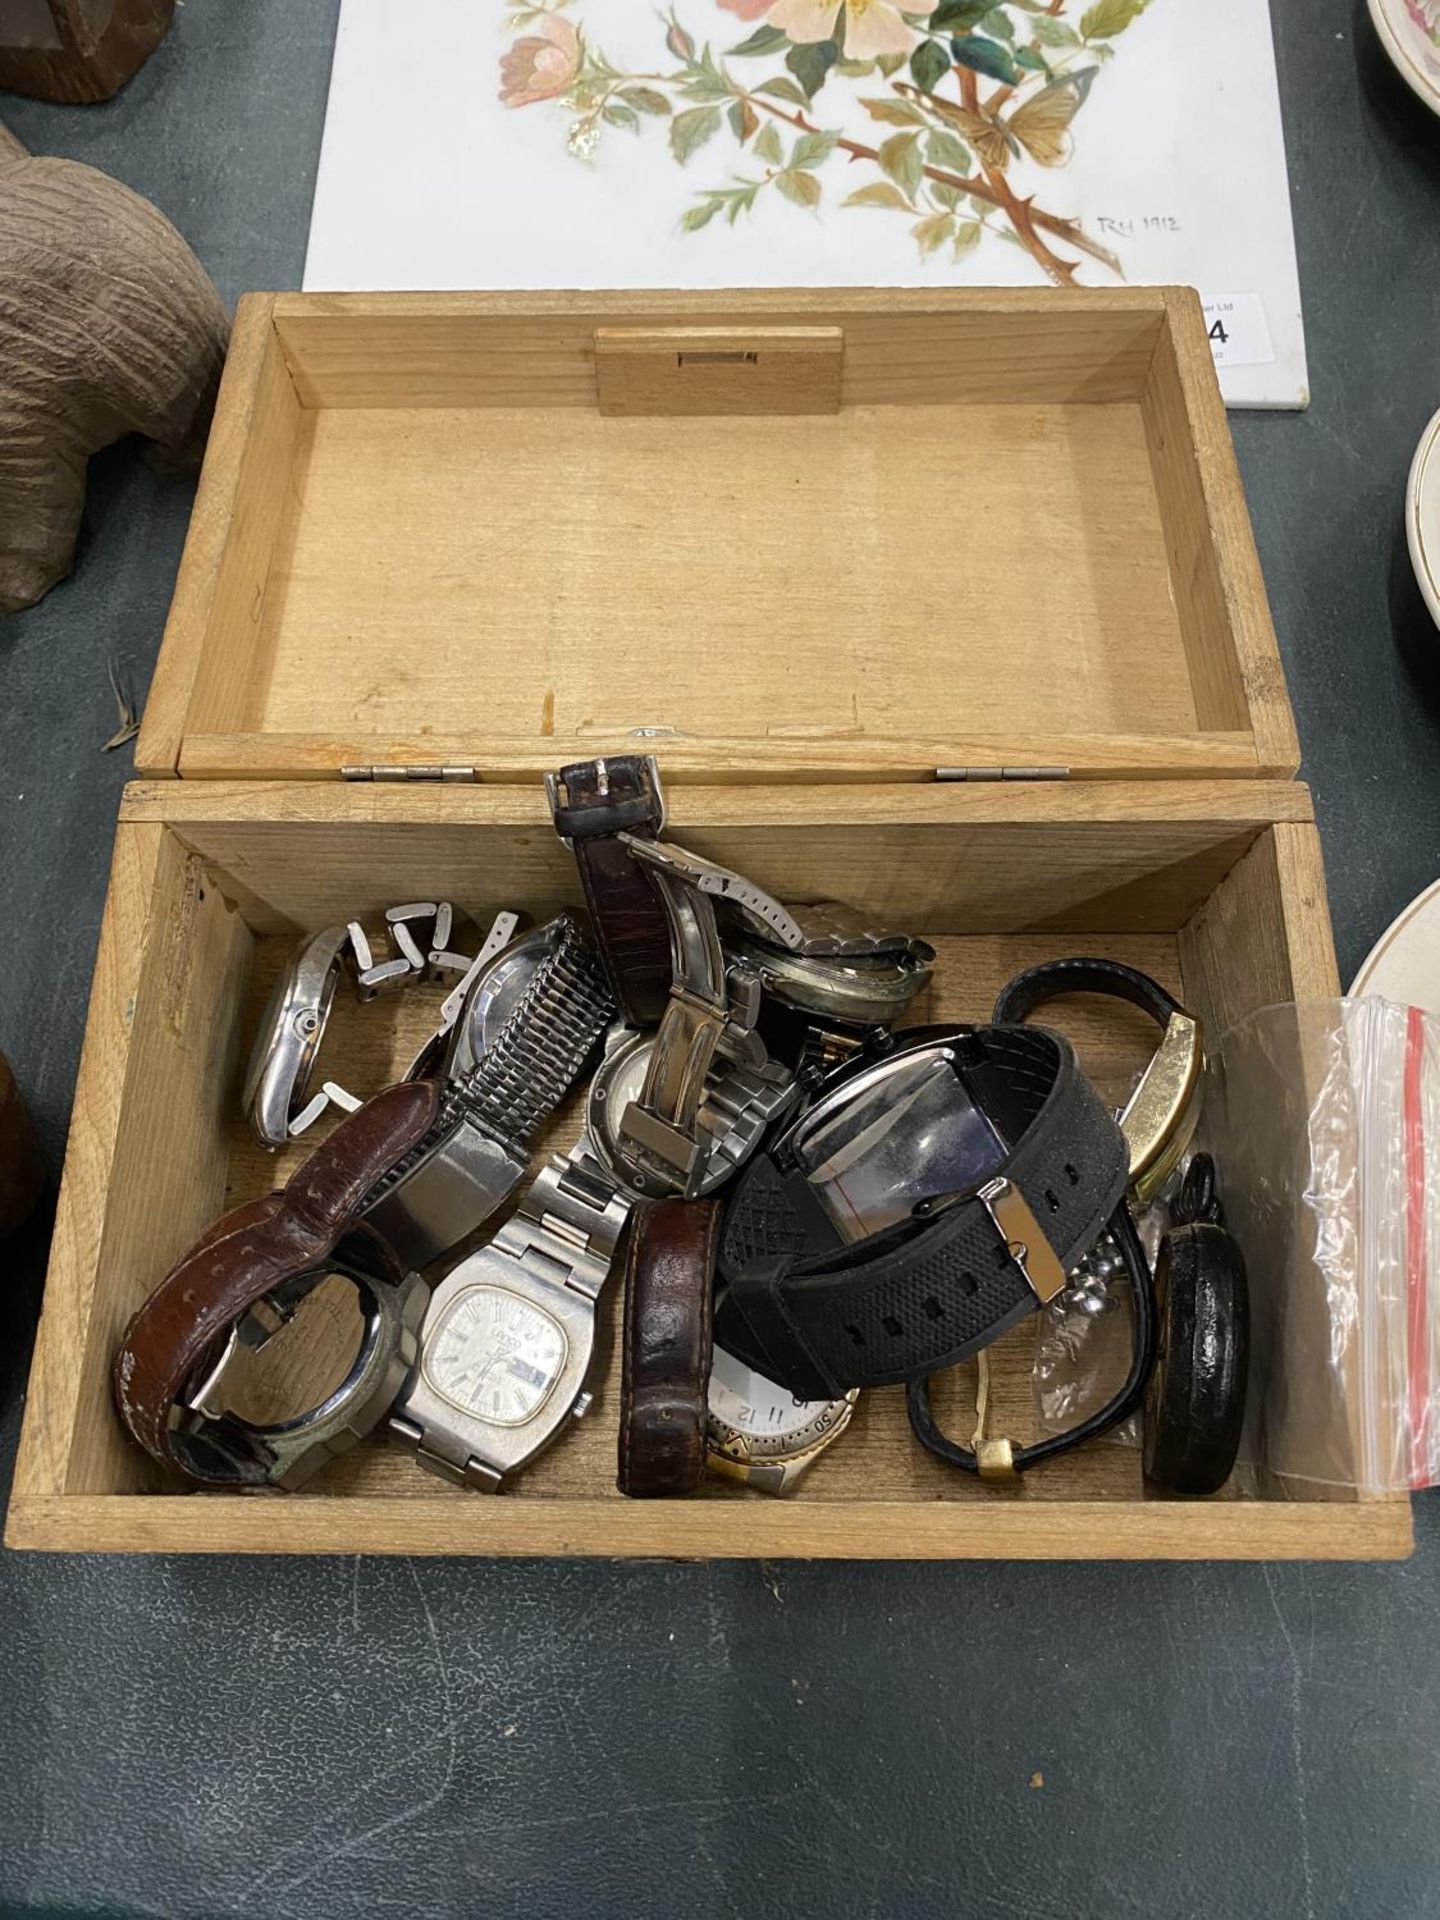 A VINTAGE WOODEN BOX CONTAINING TEN VINTAGE WATCHES TO INCLUDE TIMBERLAND, ACCURIST, ETC